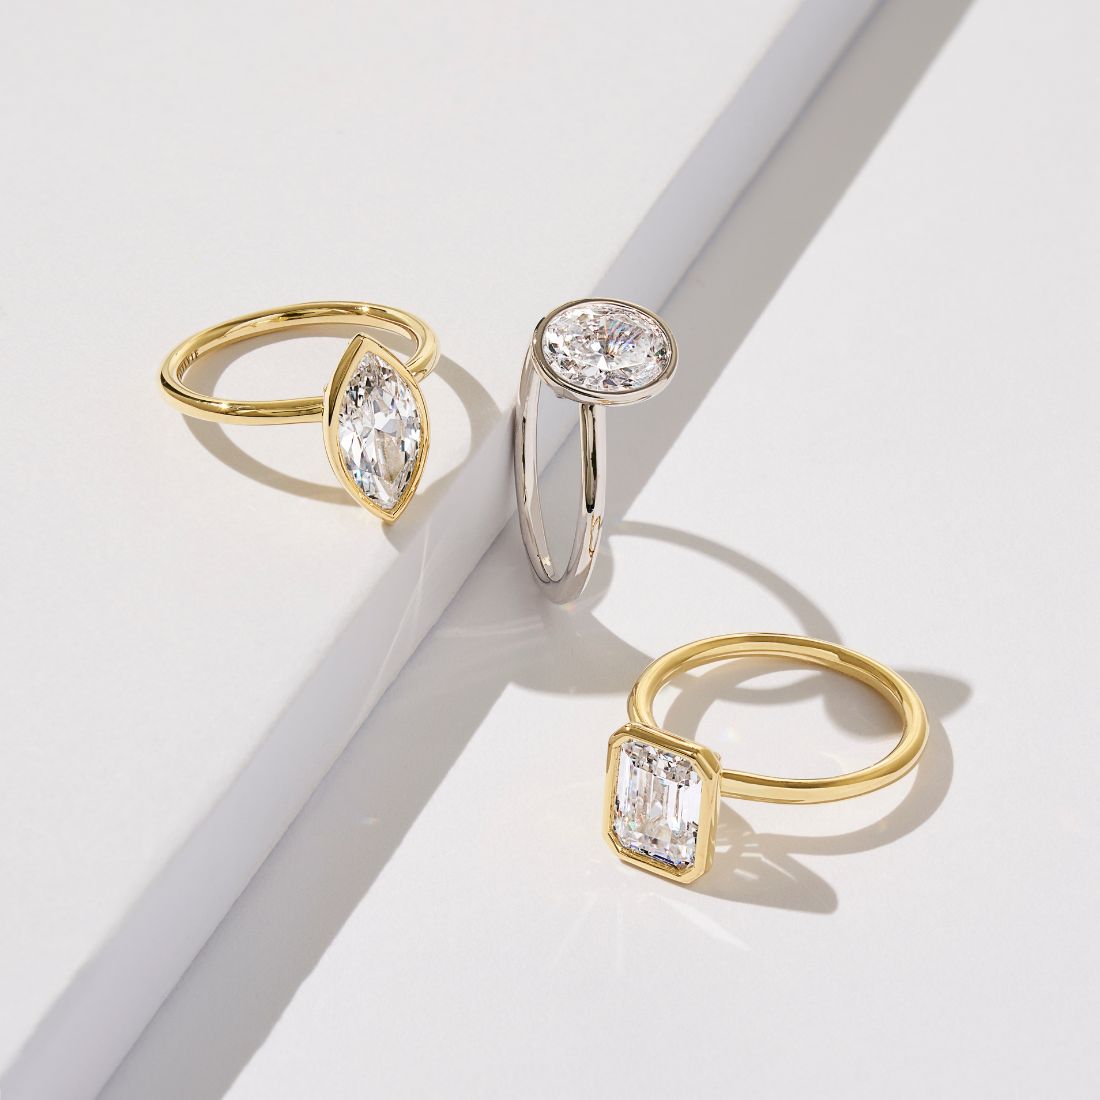 bezel set engagement rings in yellow gold and white gold for how to purchase an engagement ring